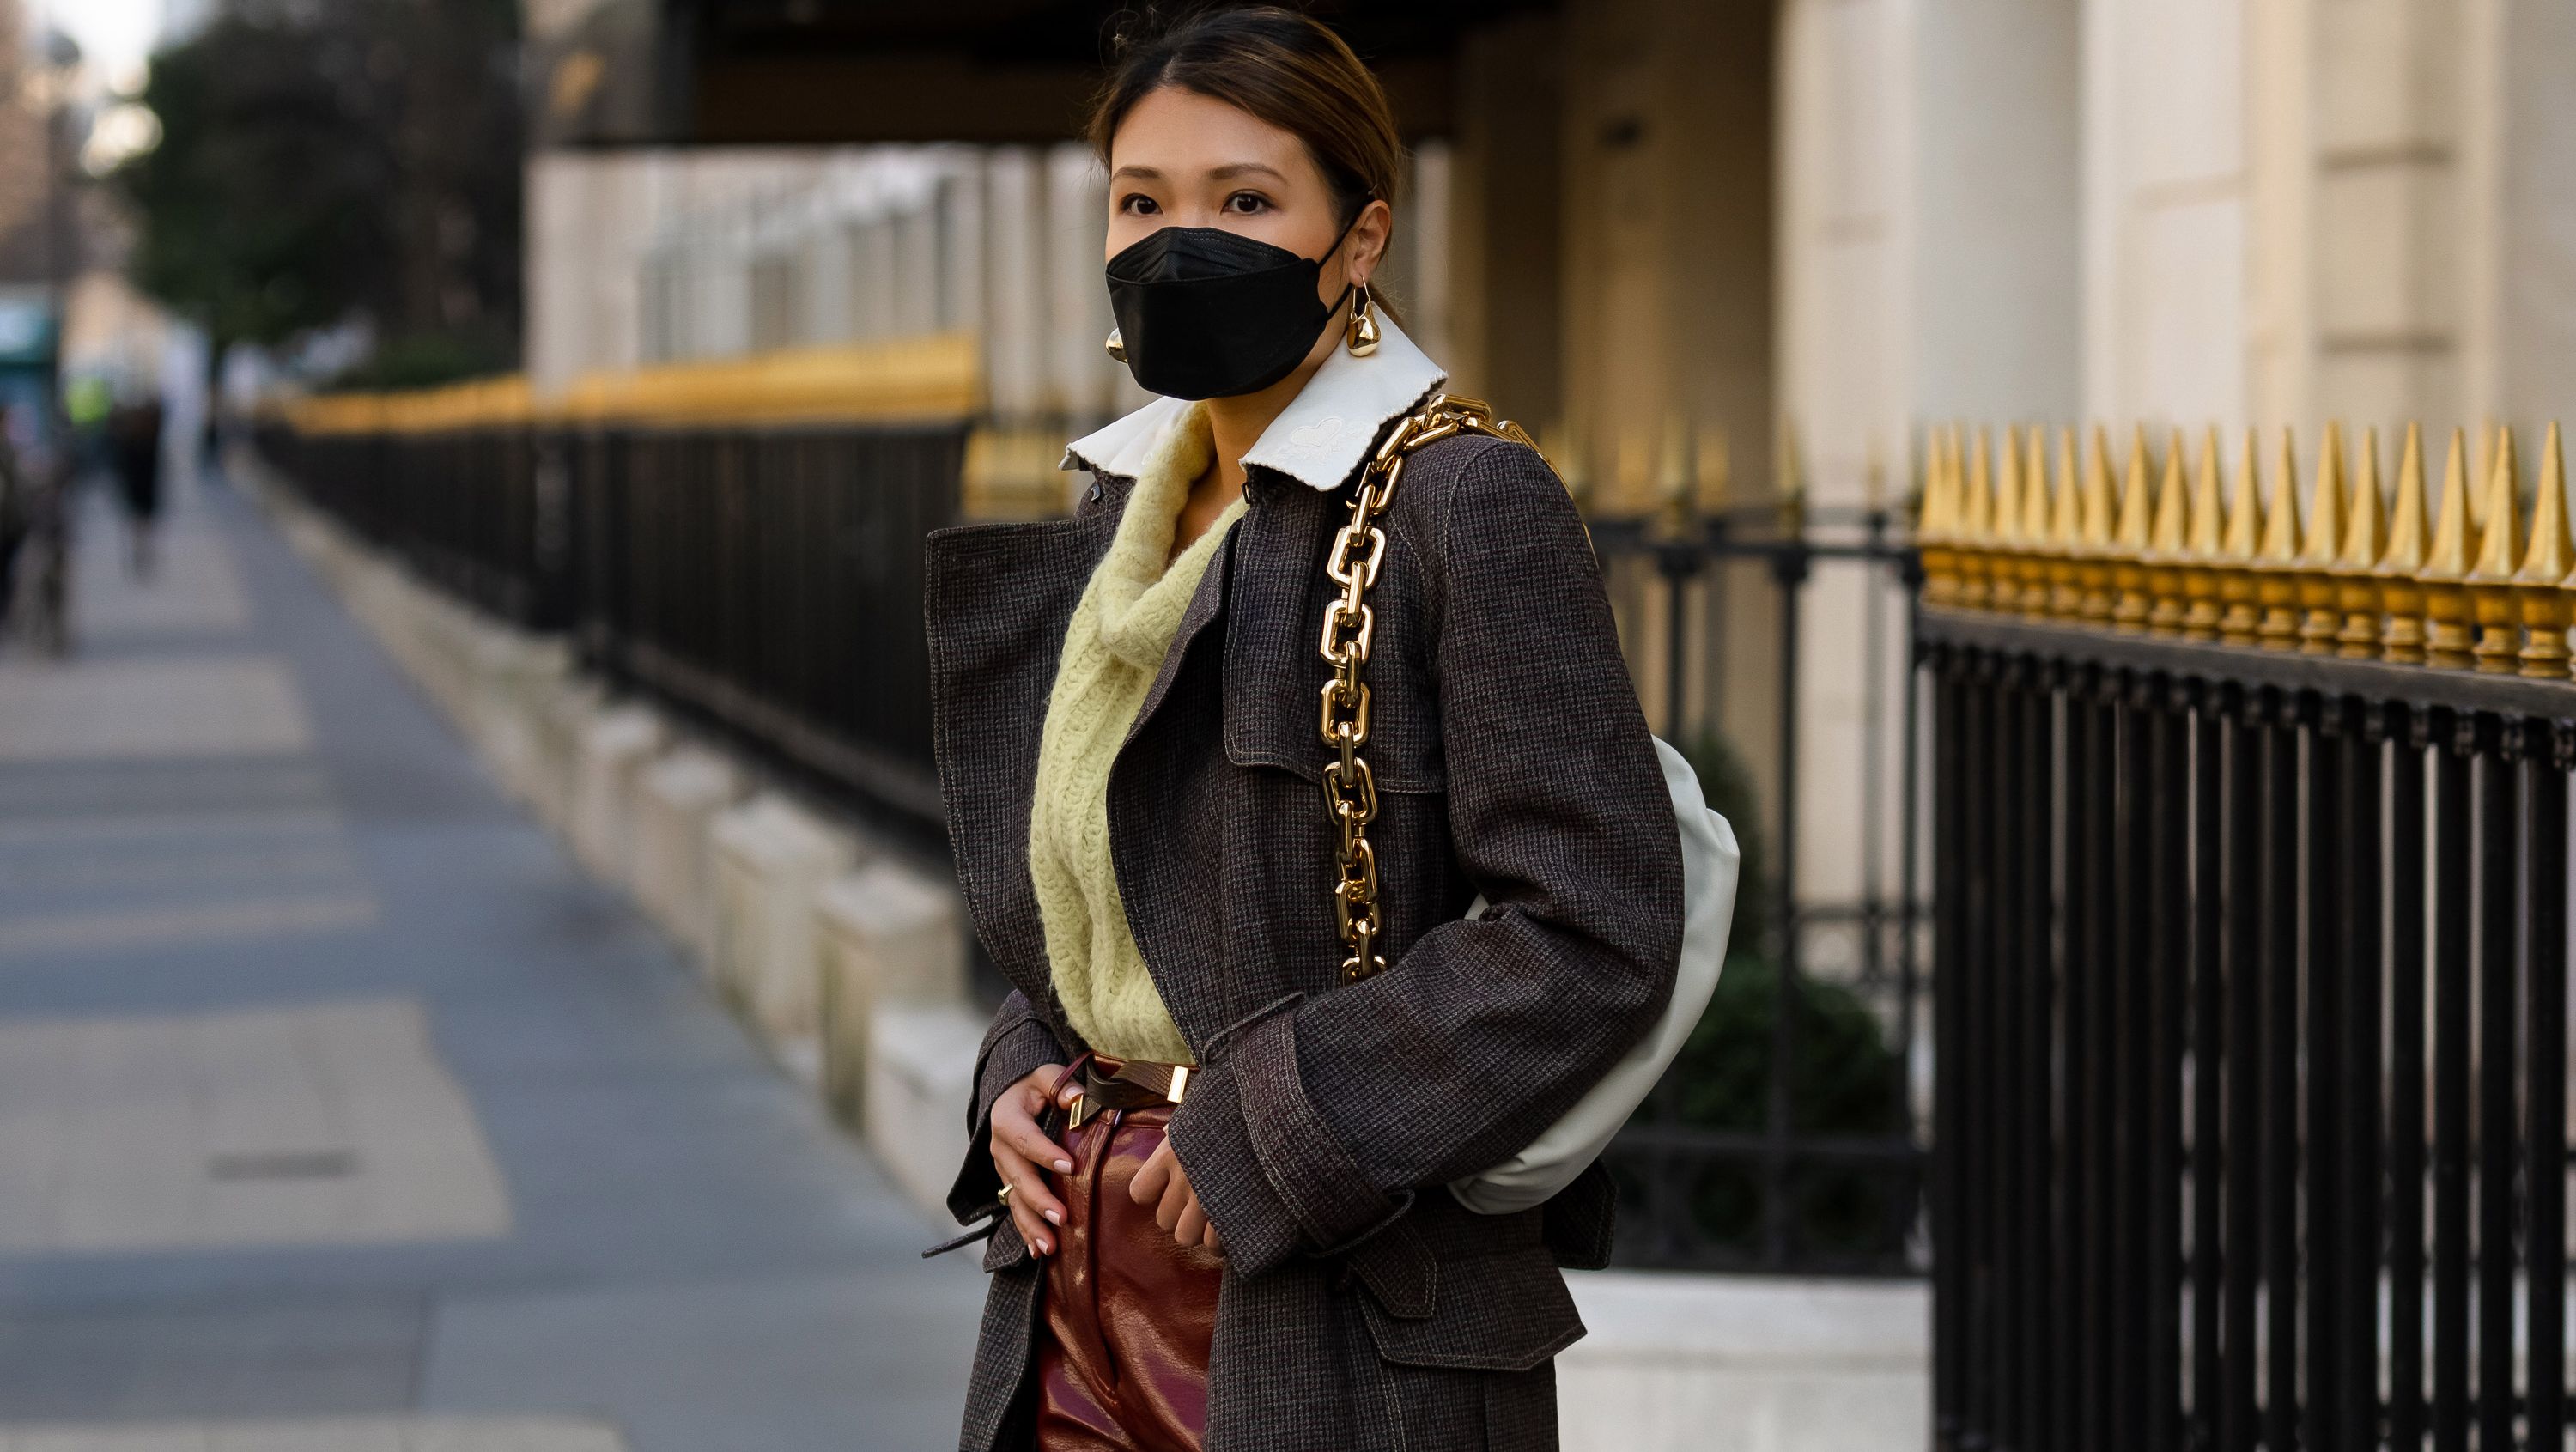 6 Outfit Ideas From Paris Fashion Week Street Style